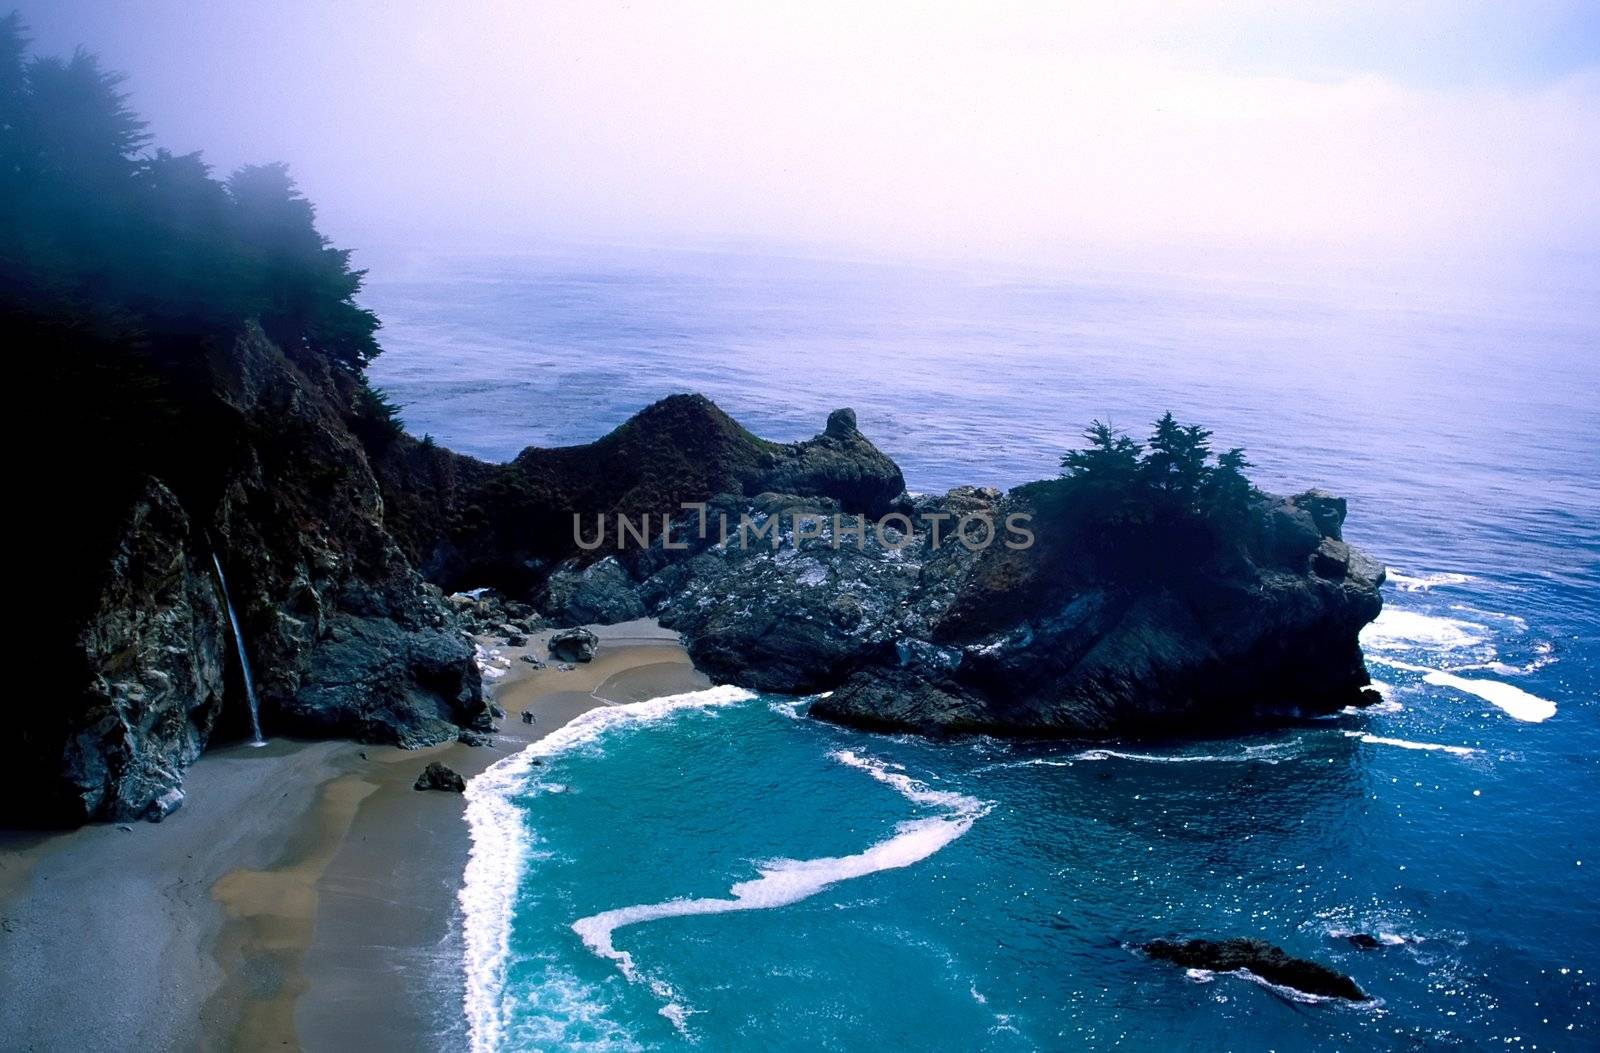 Big Sur is a sparsely populated region of the central California, United States coast where the Santa Lucia Mountains rise abruptly from the Pacific Ocean. The terrain offers stunning views, making Big Sur a popular tourist destination.